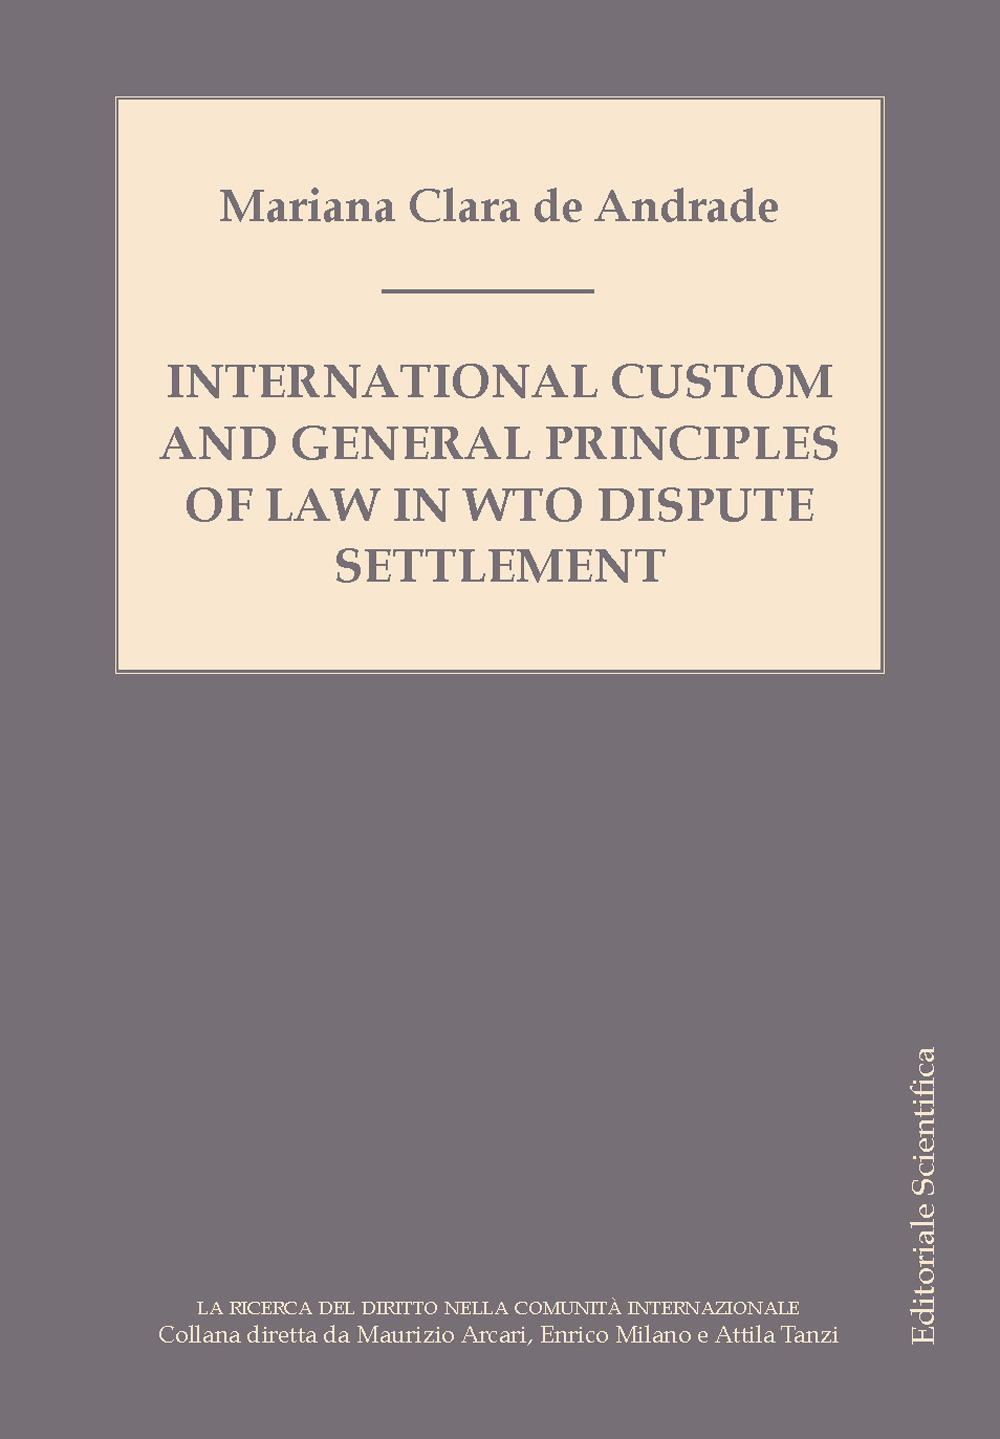 International custom and general principles of law in WTO disputes settlement